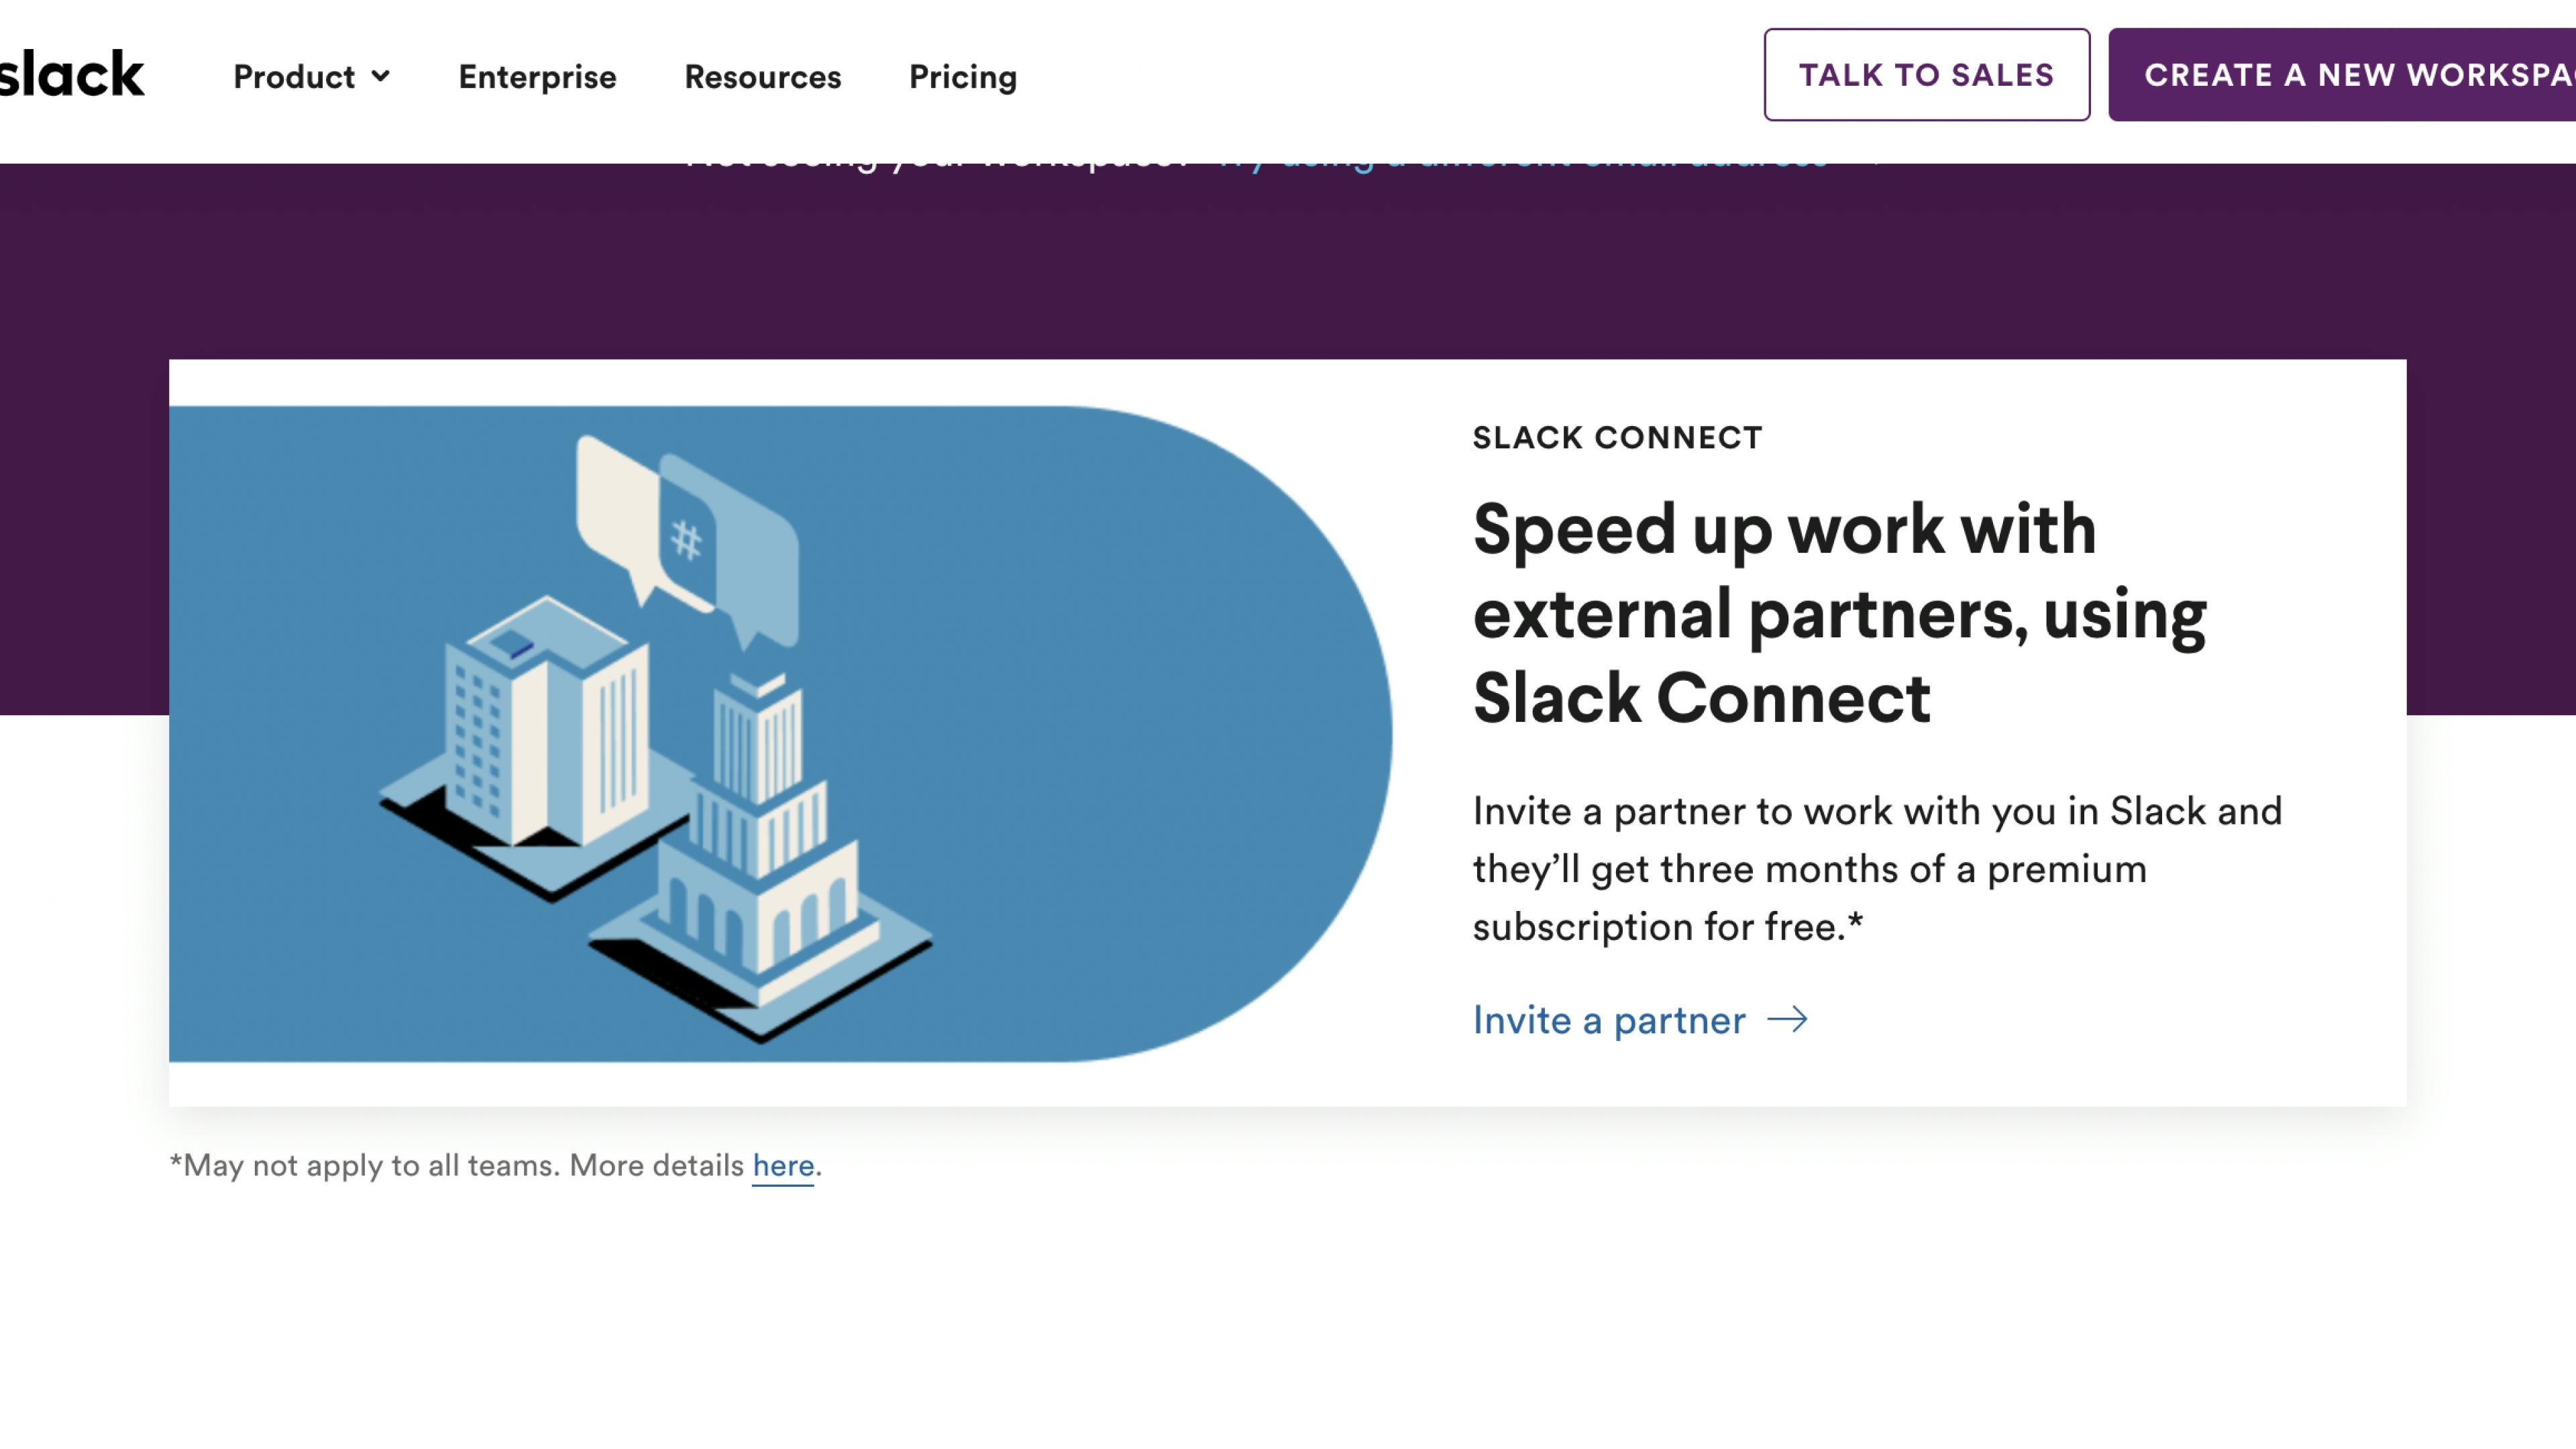 A screenshot from a Slack marketing page. It shows an illustration of two small buildings with speech bubbles above them, as if talking to eachother. A paragraph next to is titled "Speed up work with external partners, using Slack Connect"